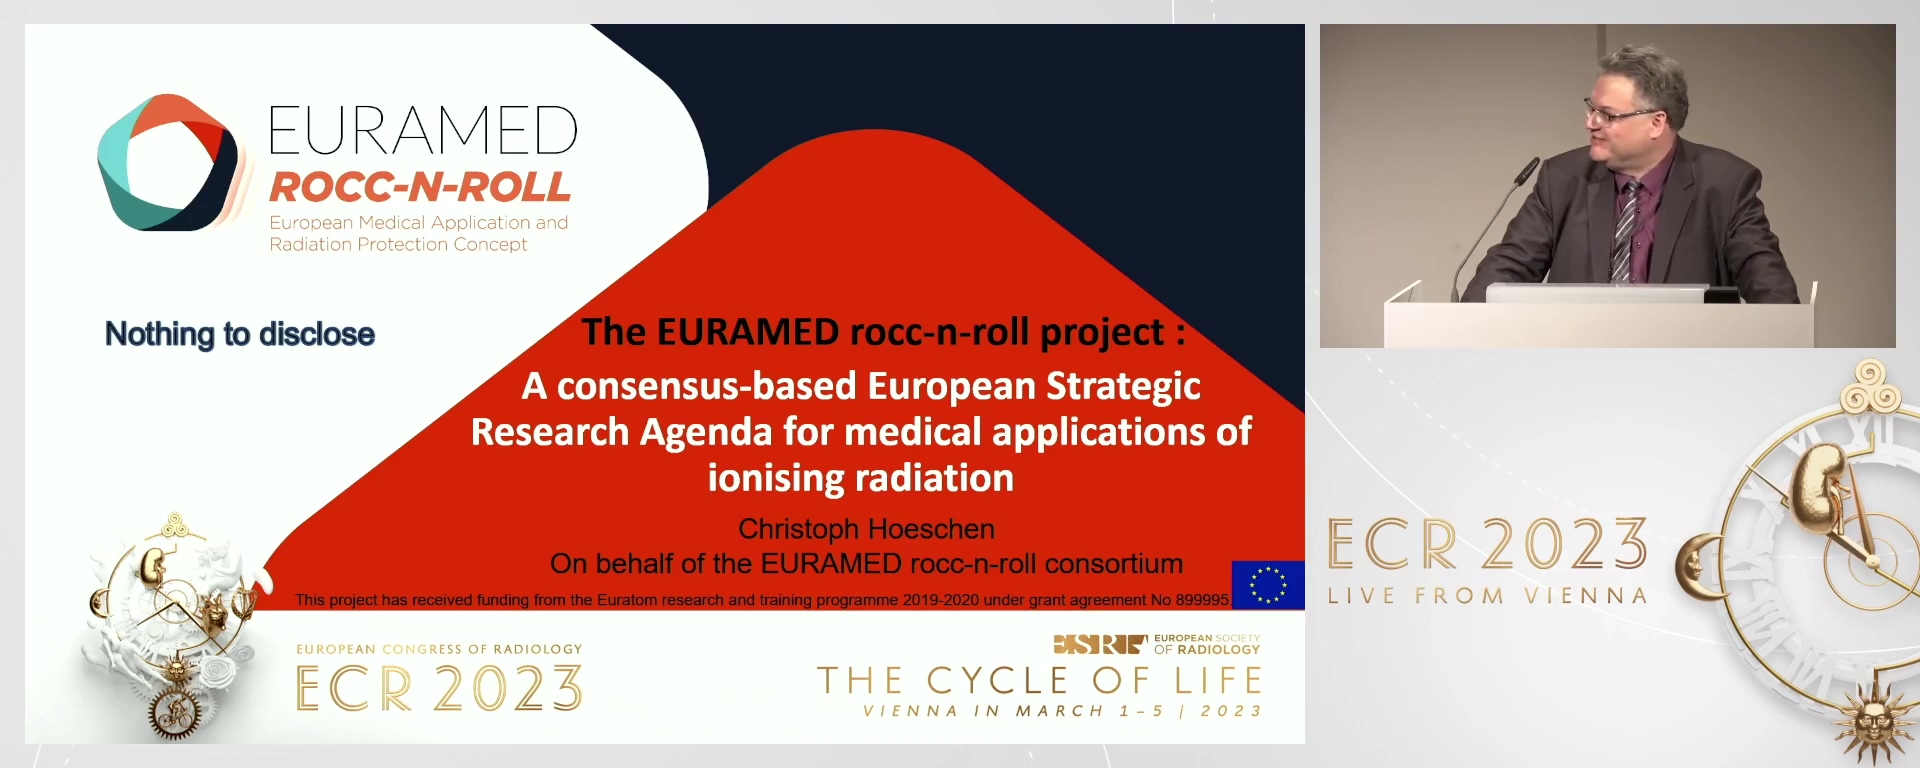 A consensus-based European Strategic Research Agenda for medical applications of ionising radiation - Christoph Hoeschen, Magdeburg / DE